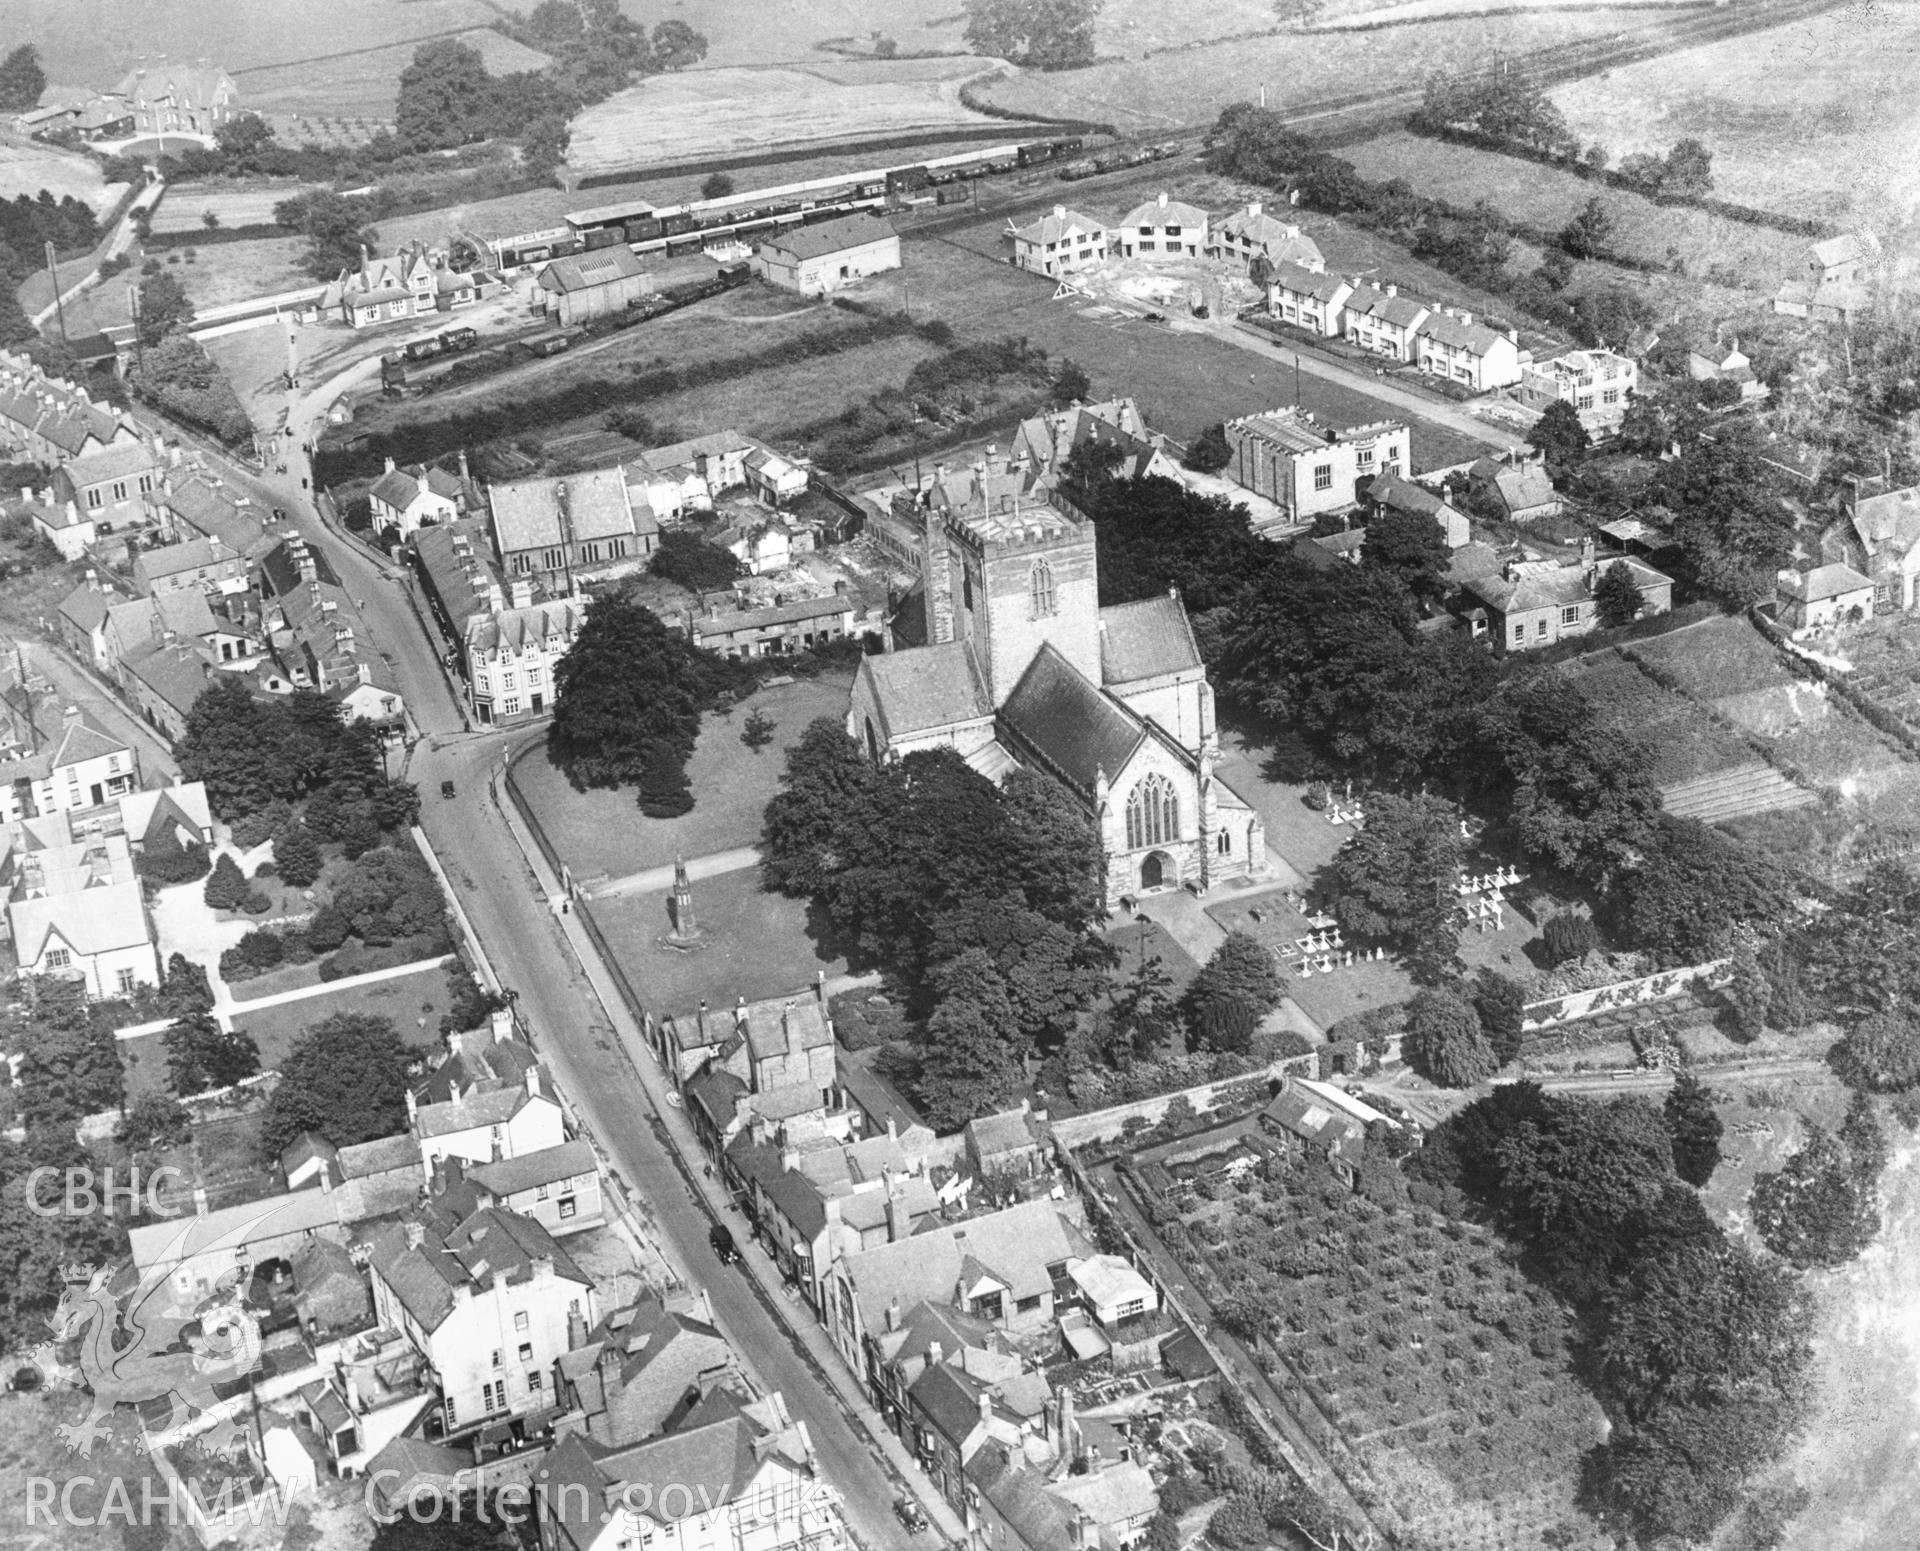 1 b/w print showing aerial view of St Asaph Cathedral, collated by the former Central Office of Information.